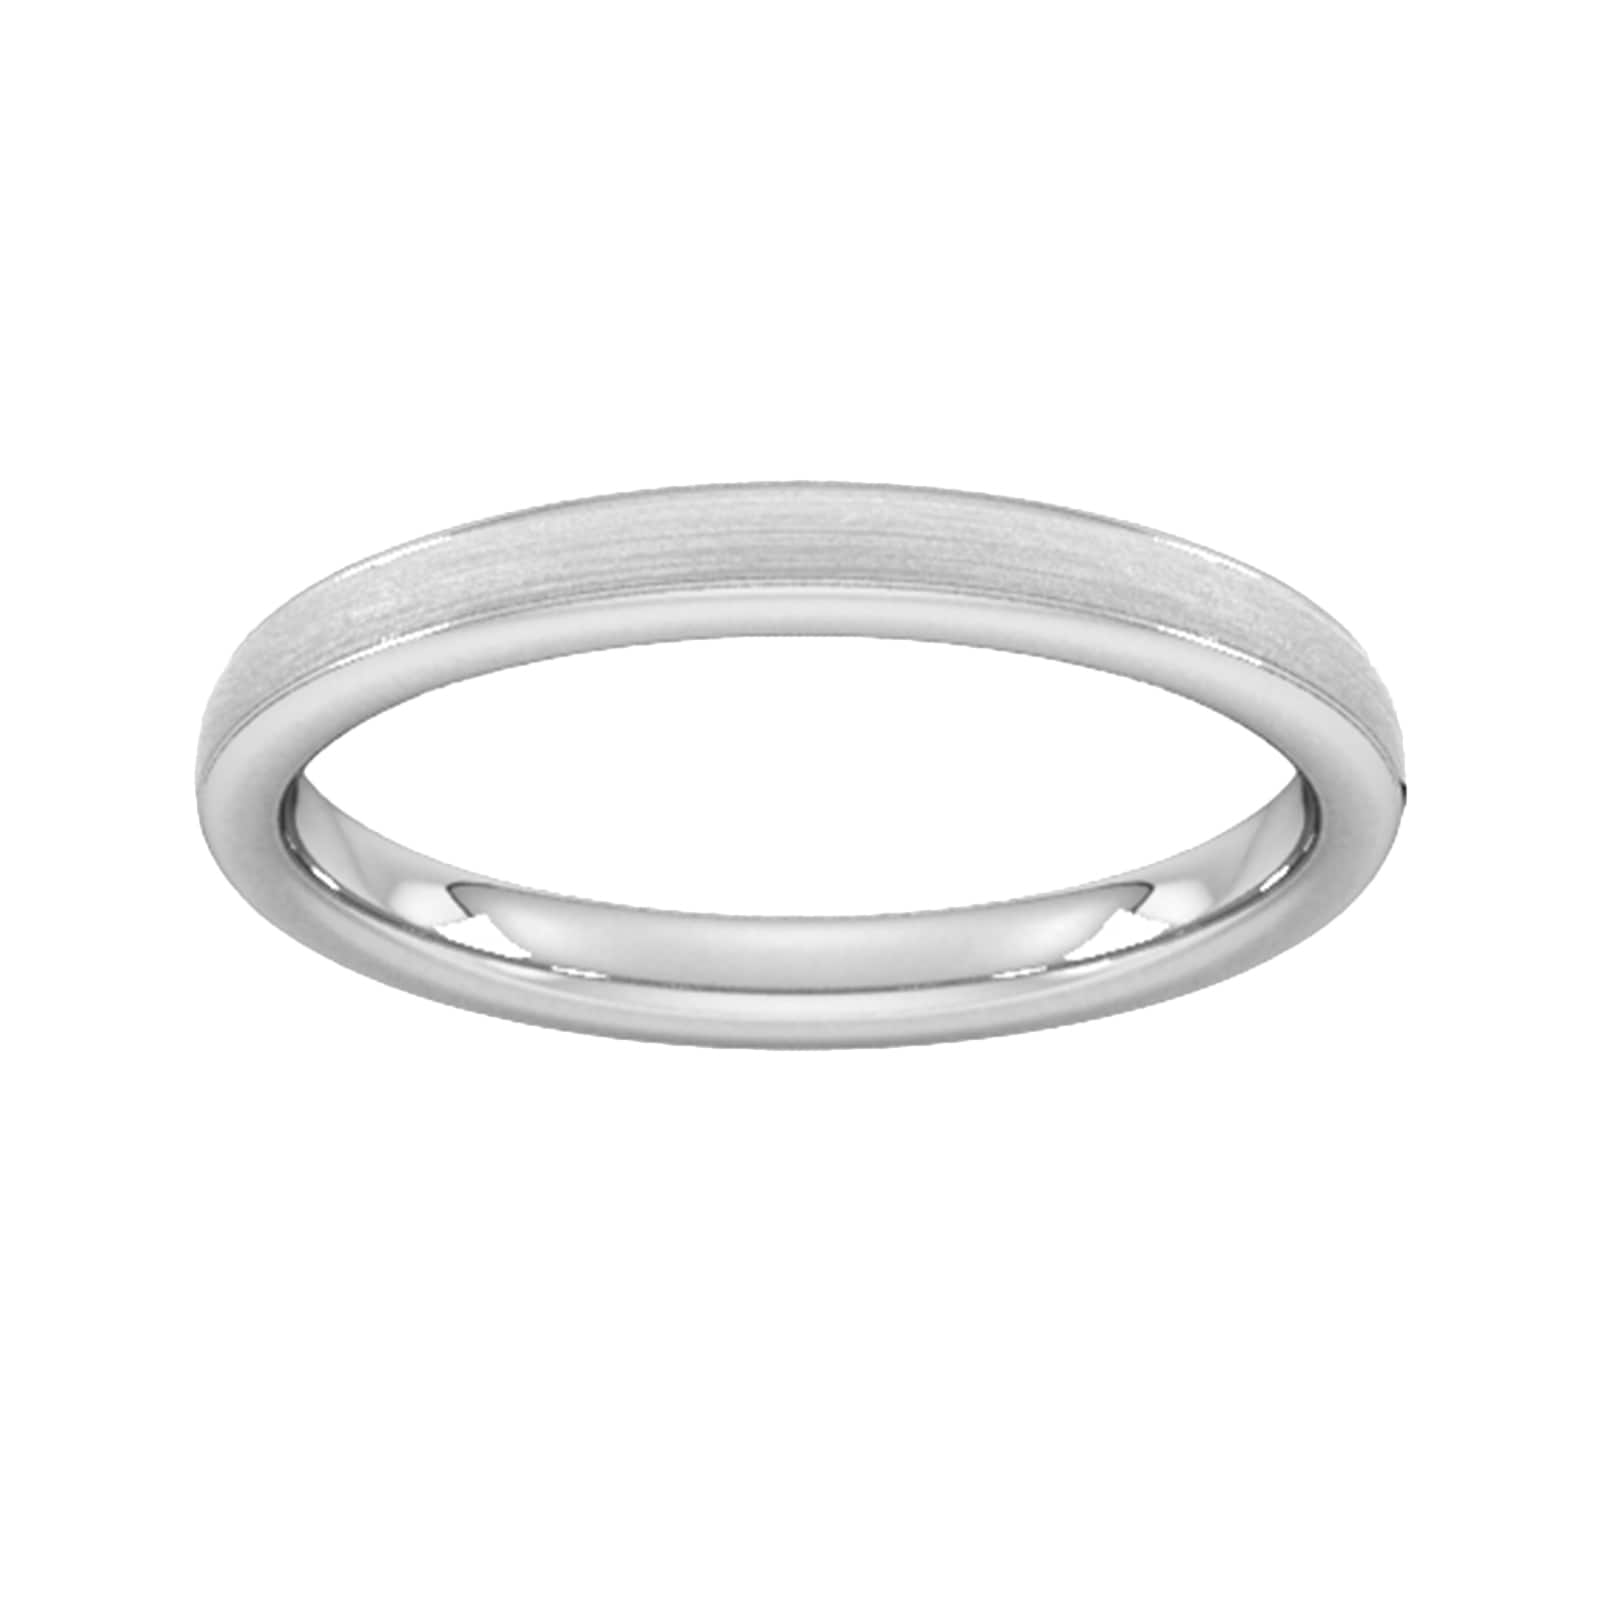 2.5mm D Shape Heavy Matt Centre With Grooves Wedding Ring In 9 Carat White Gold - Ring Size R